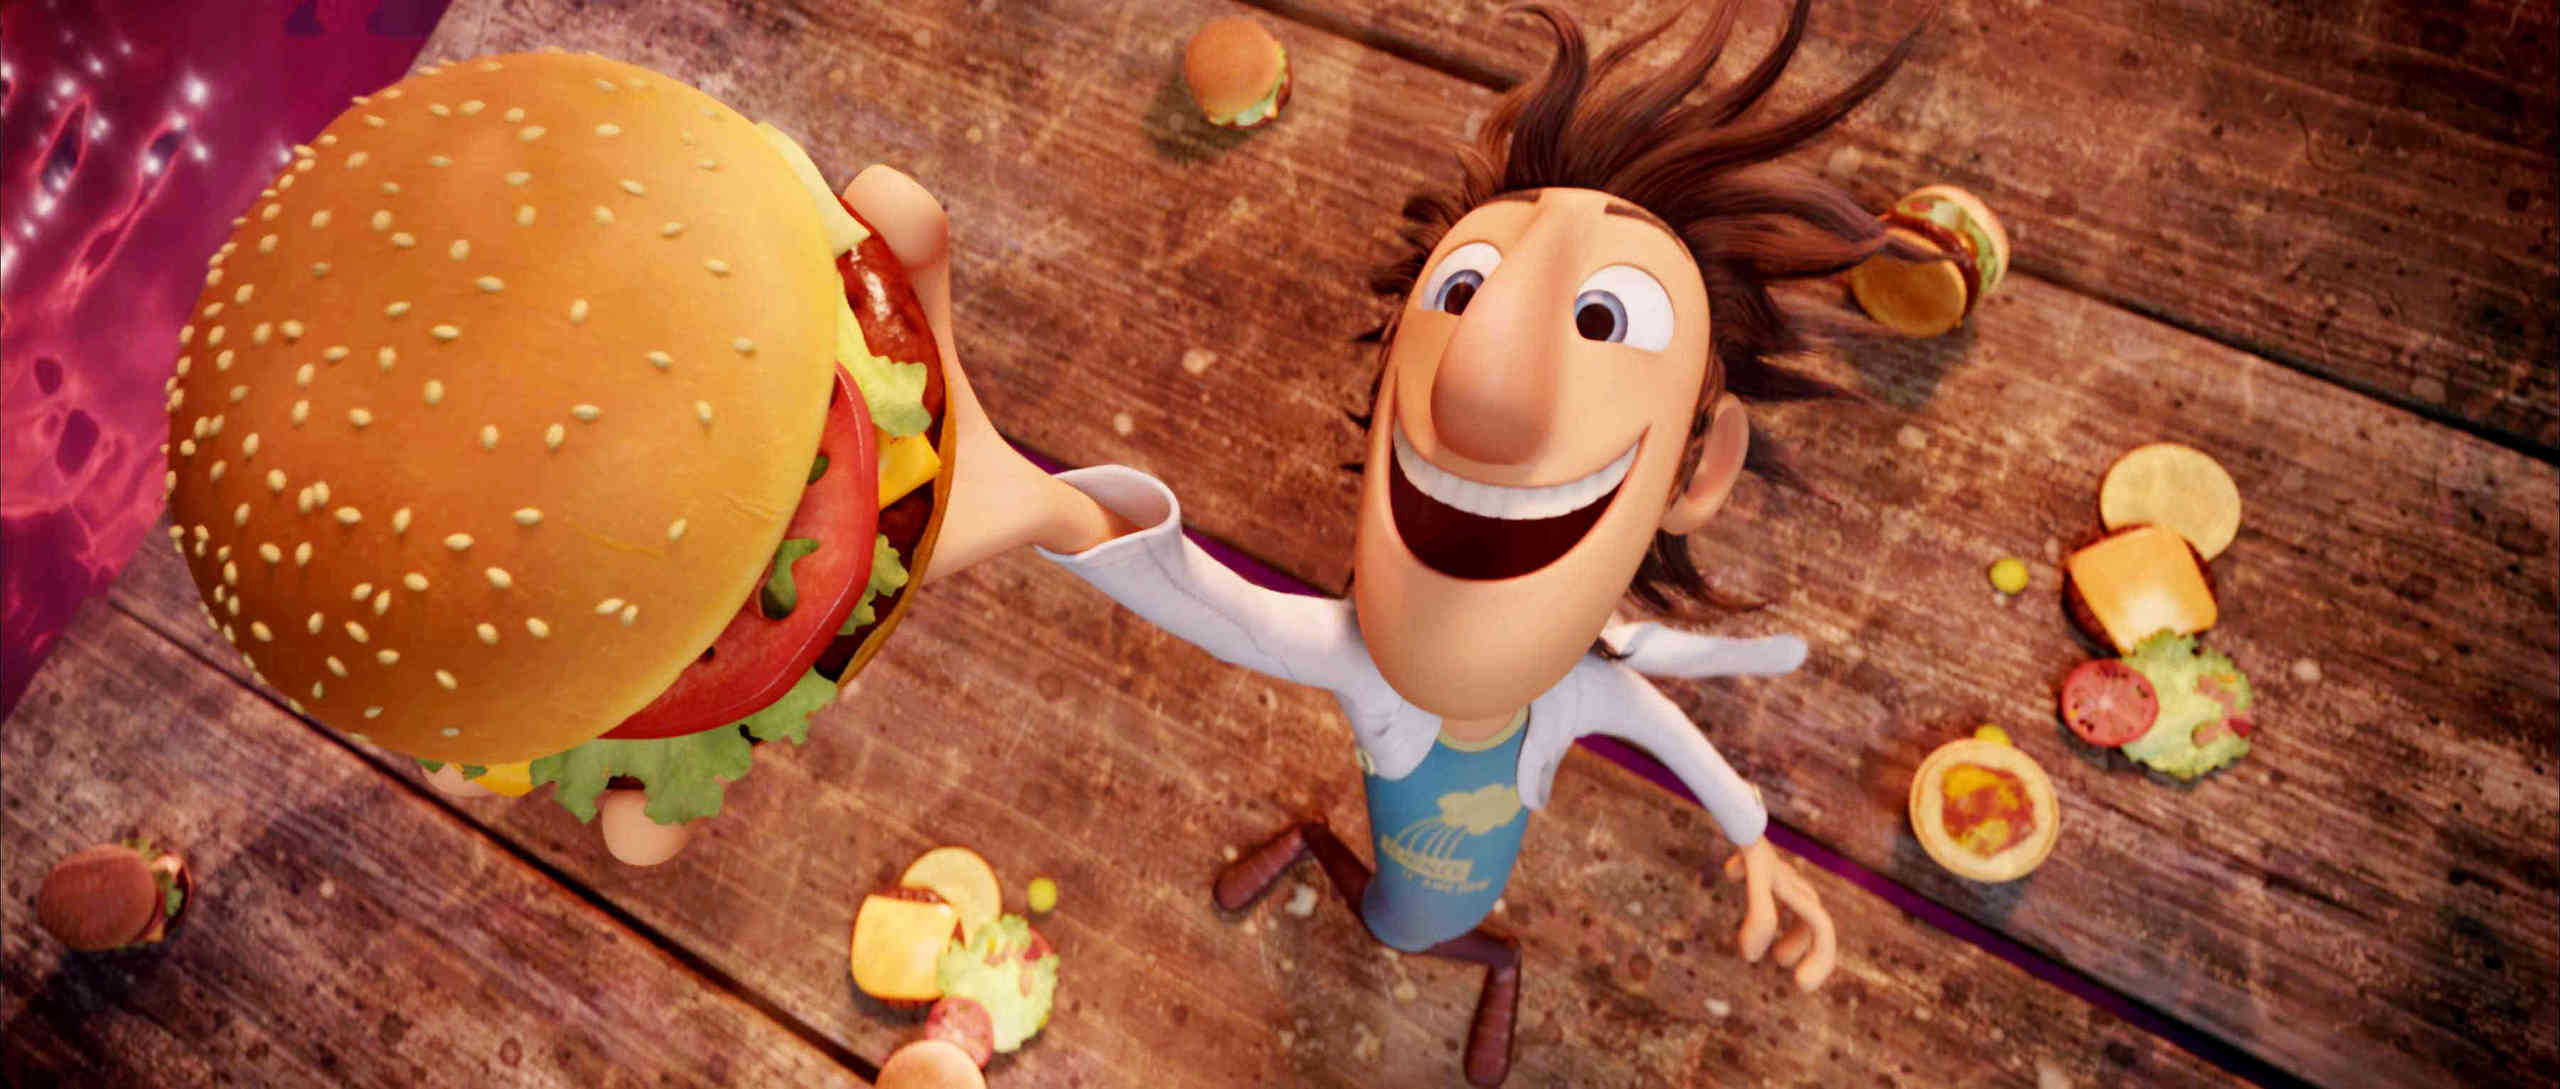 Cloudy With A Chance Of Meatballs Image